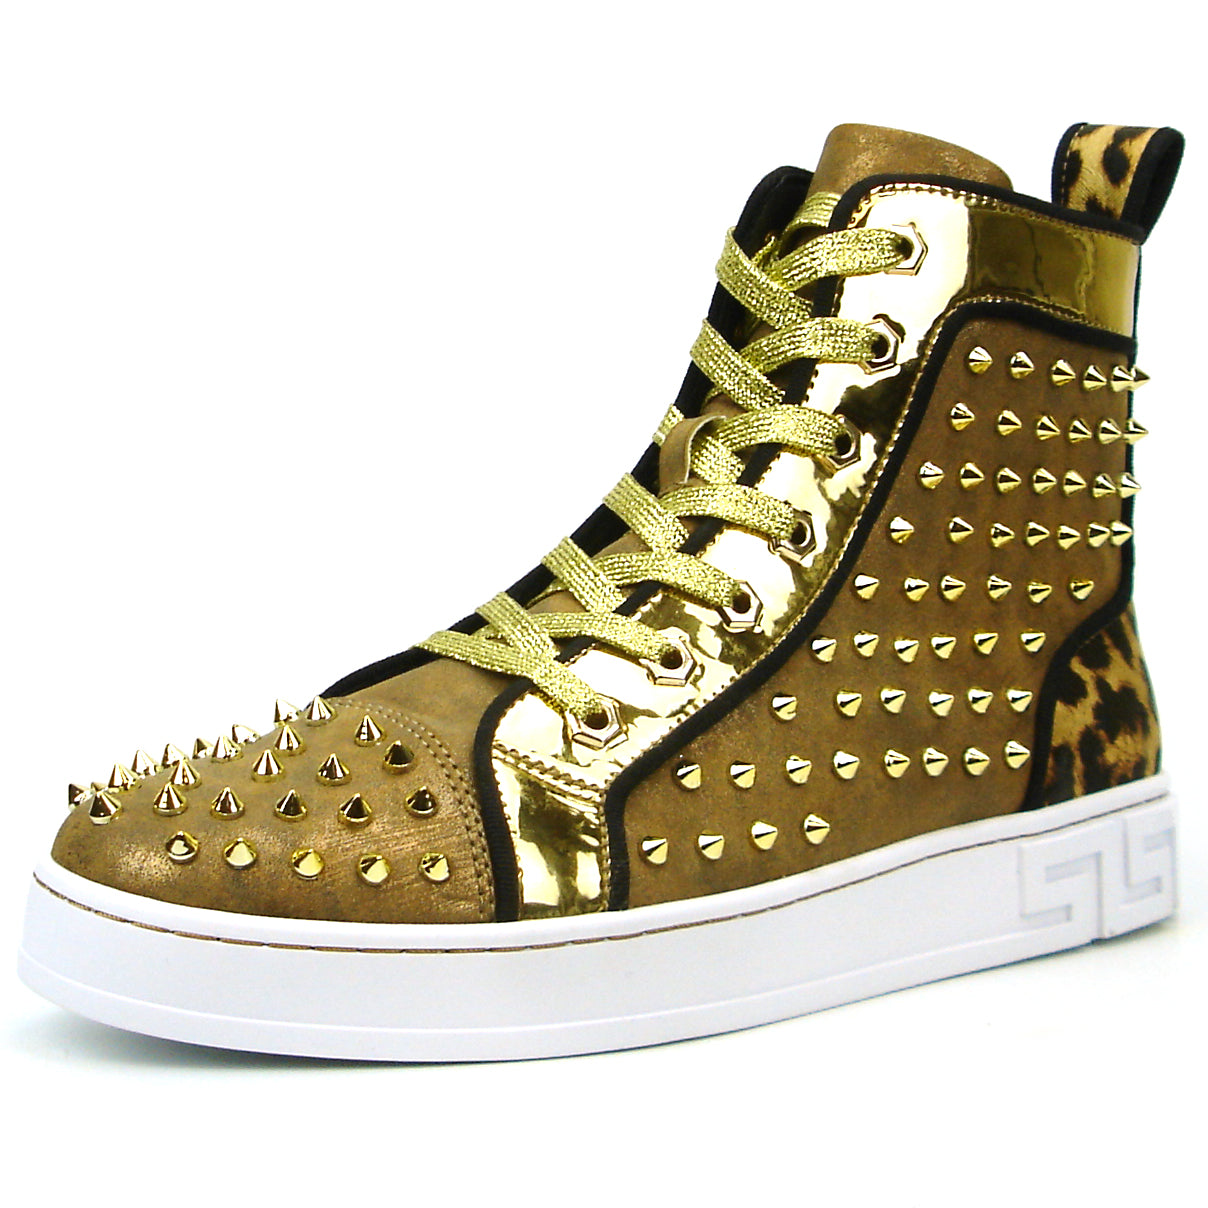 FI-2364 Gold Suede Gold Spikes High top Sneaker Encore by Fiesso